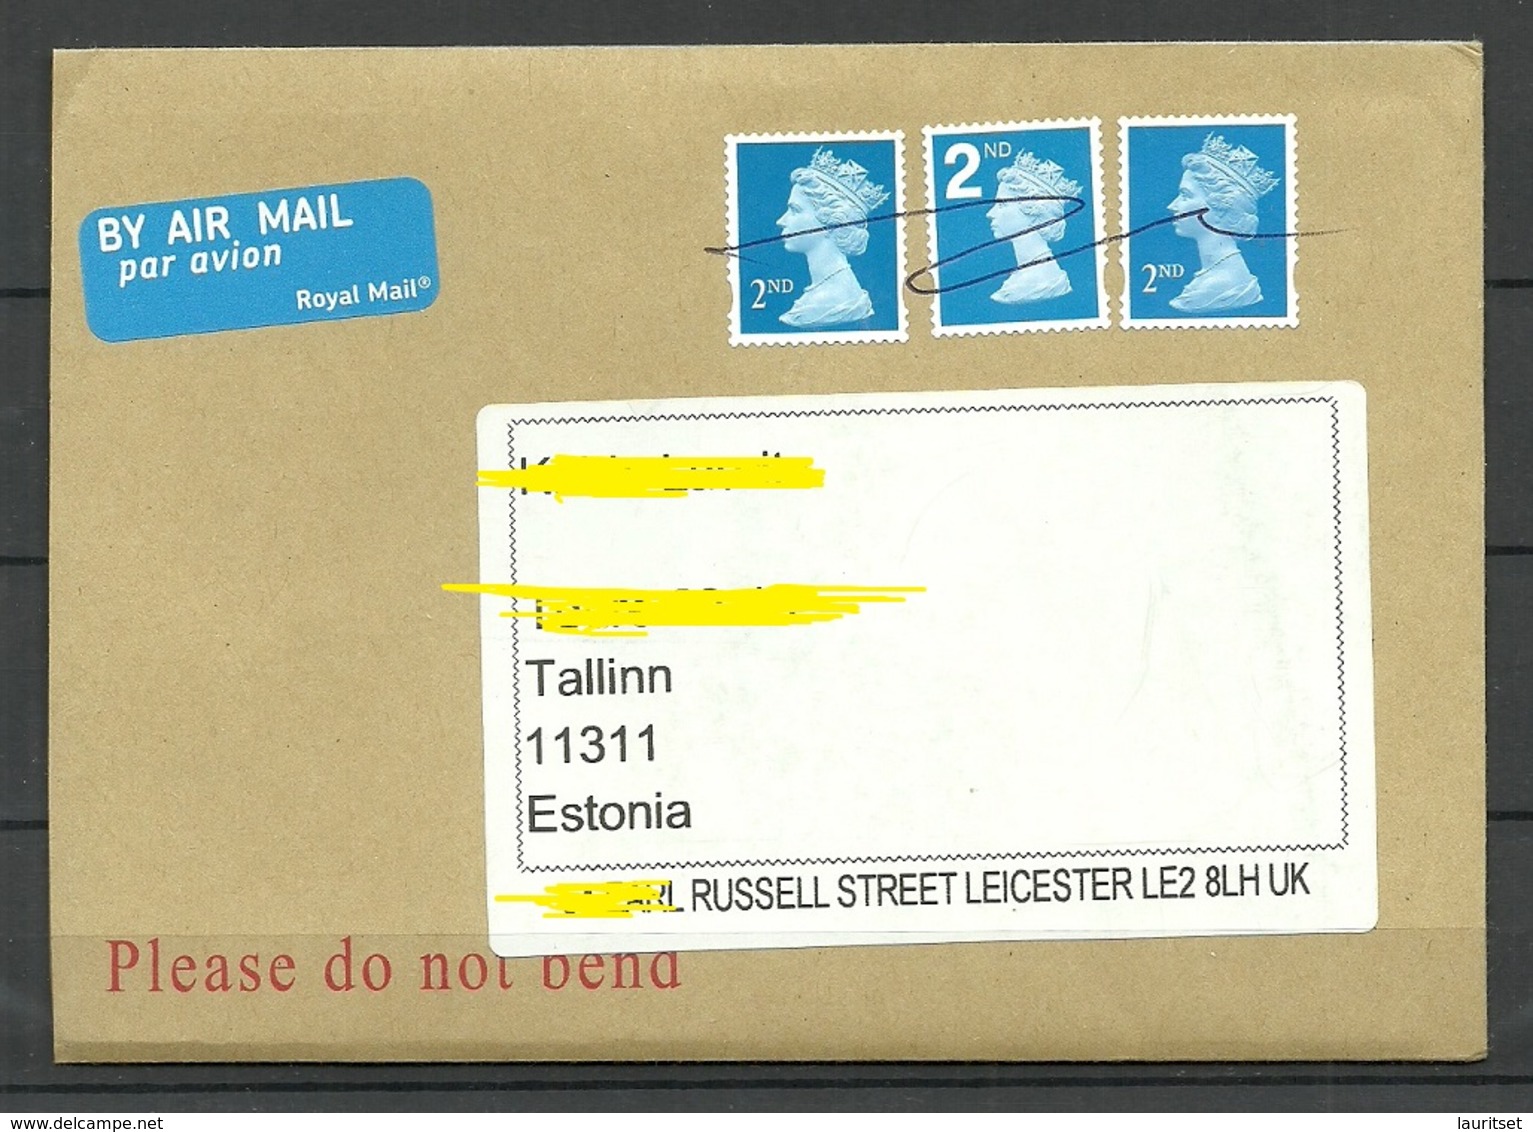 GREAT BRITAIN 2019 Air Mail Cover Queen Elizabeth Stamp X 3 Cancelled By Hand To Estonia - Covers & Documents